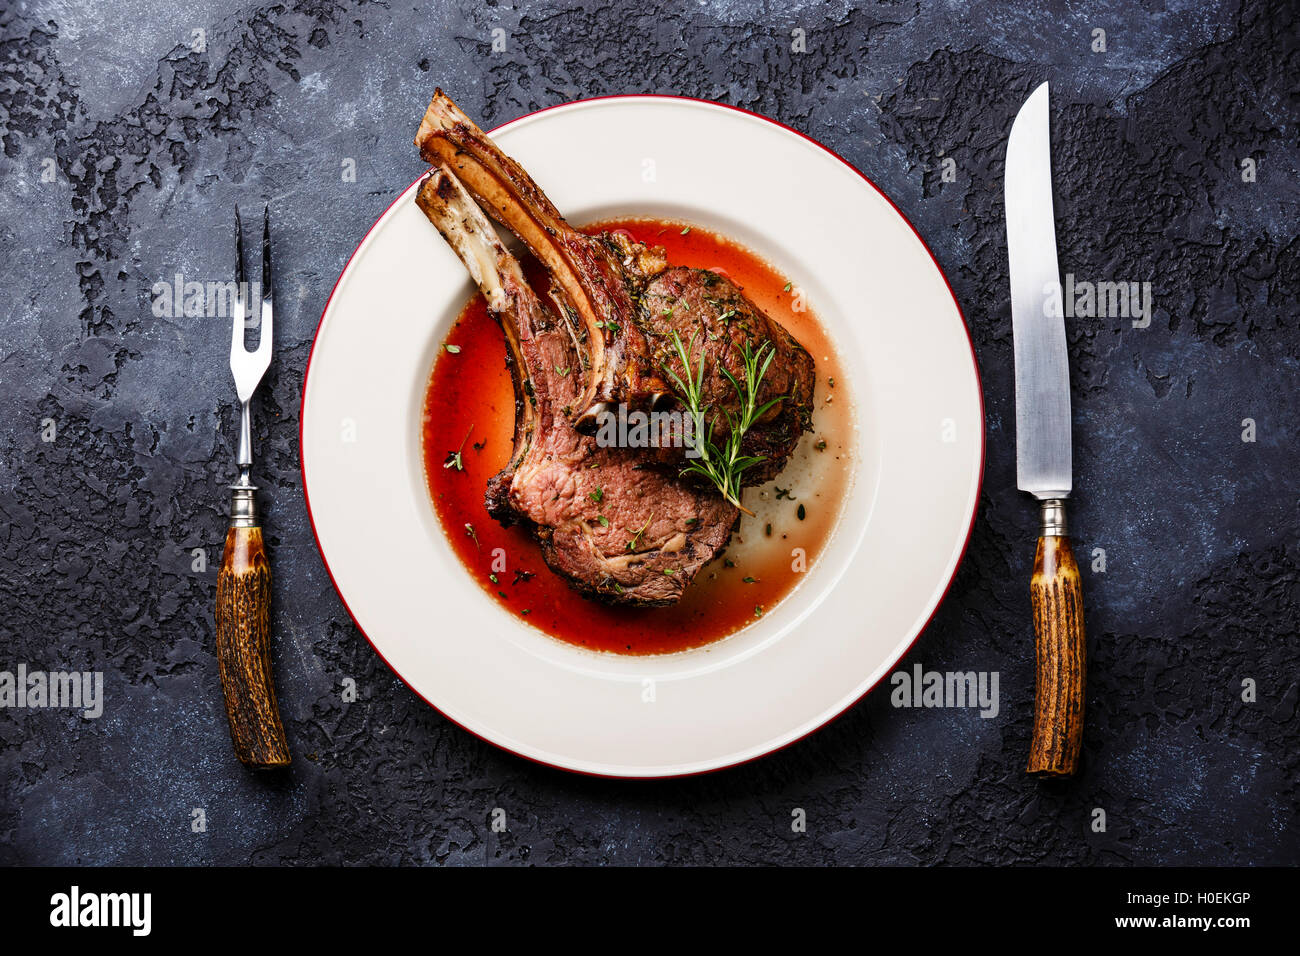 Roasted beef ribs on bone on plate with knife and fork carving set on dark background Stock Photo